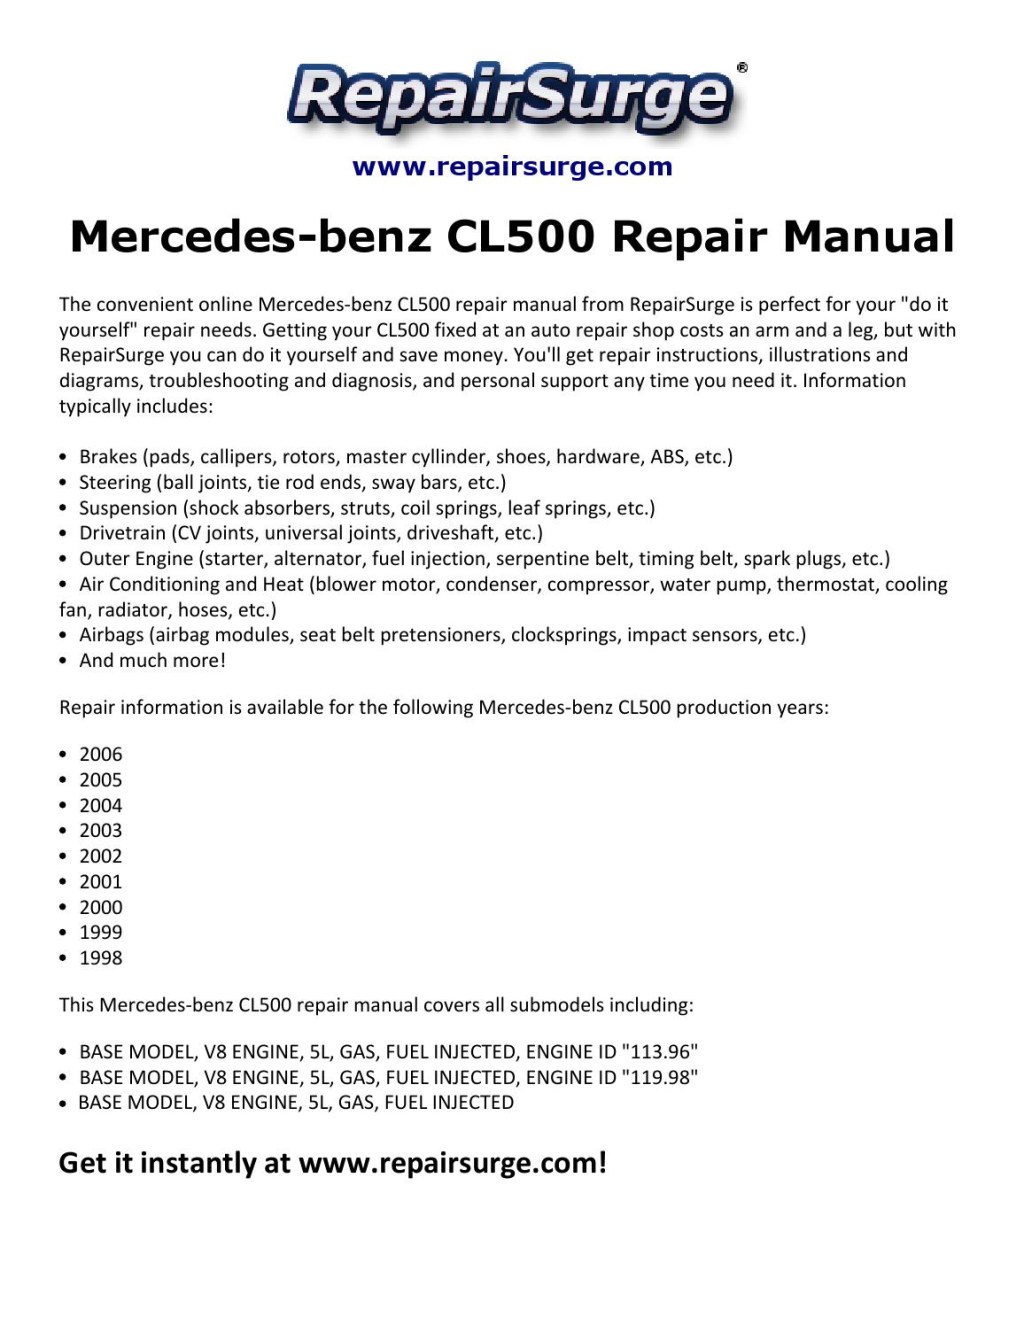 Picture of: Mercedes benz cl repair manual   by michael jatenson